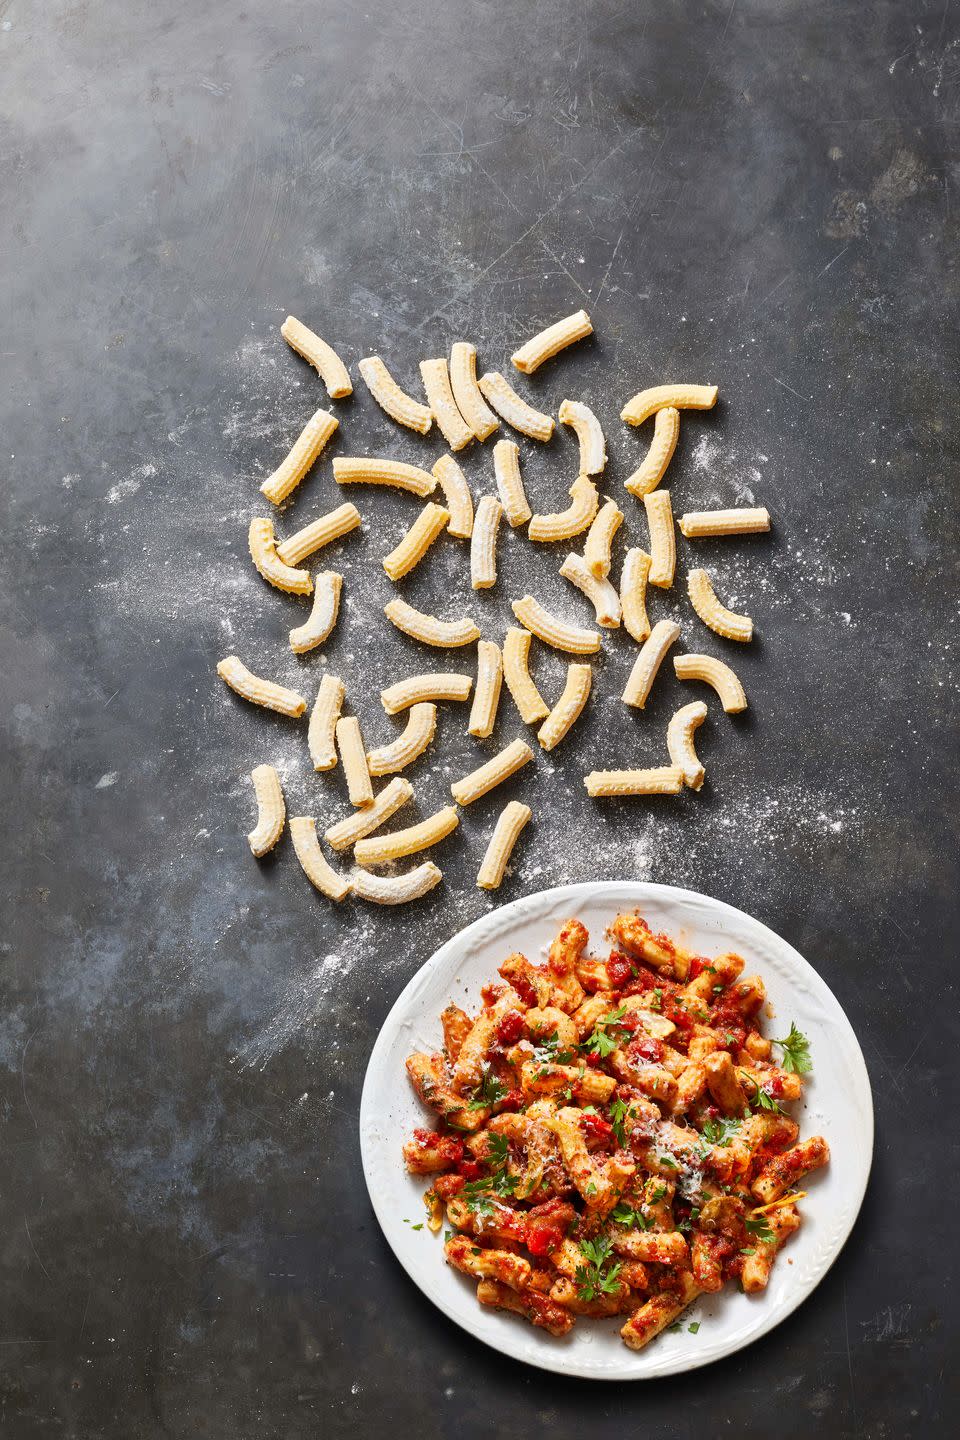 7) Penne with Spicy Anchovy Marinara